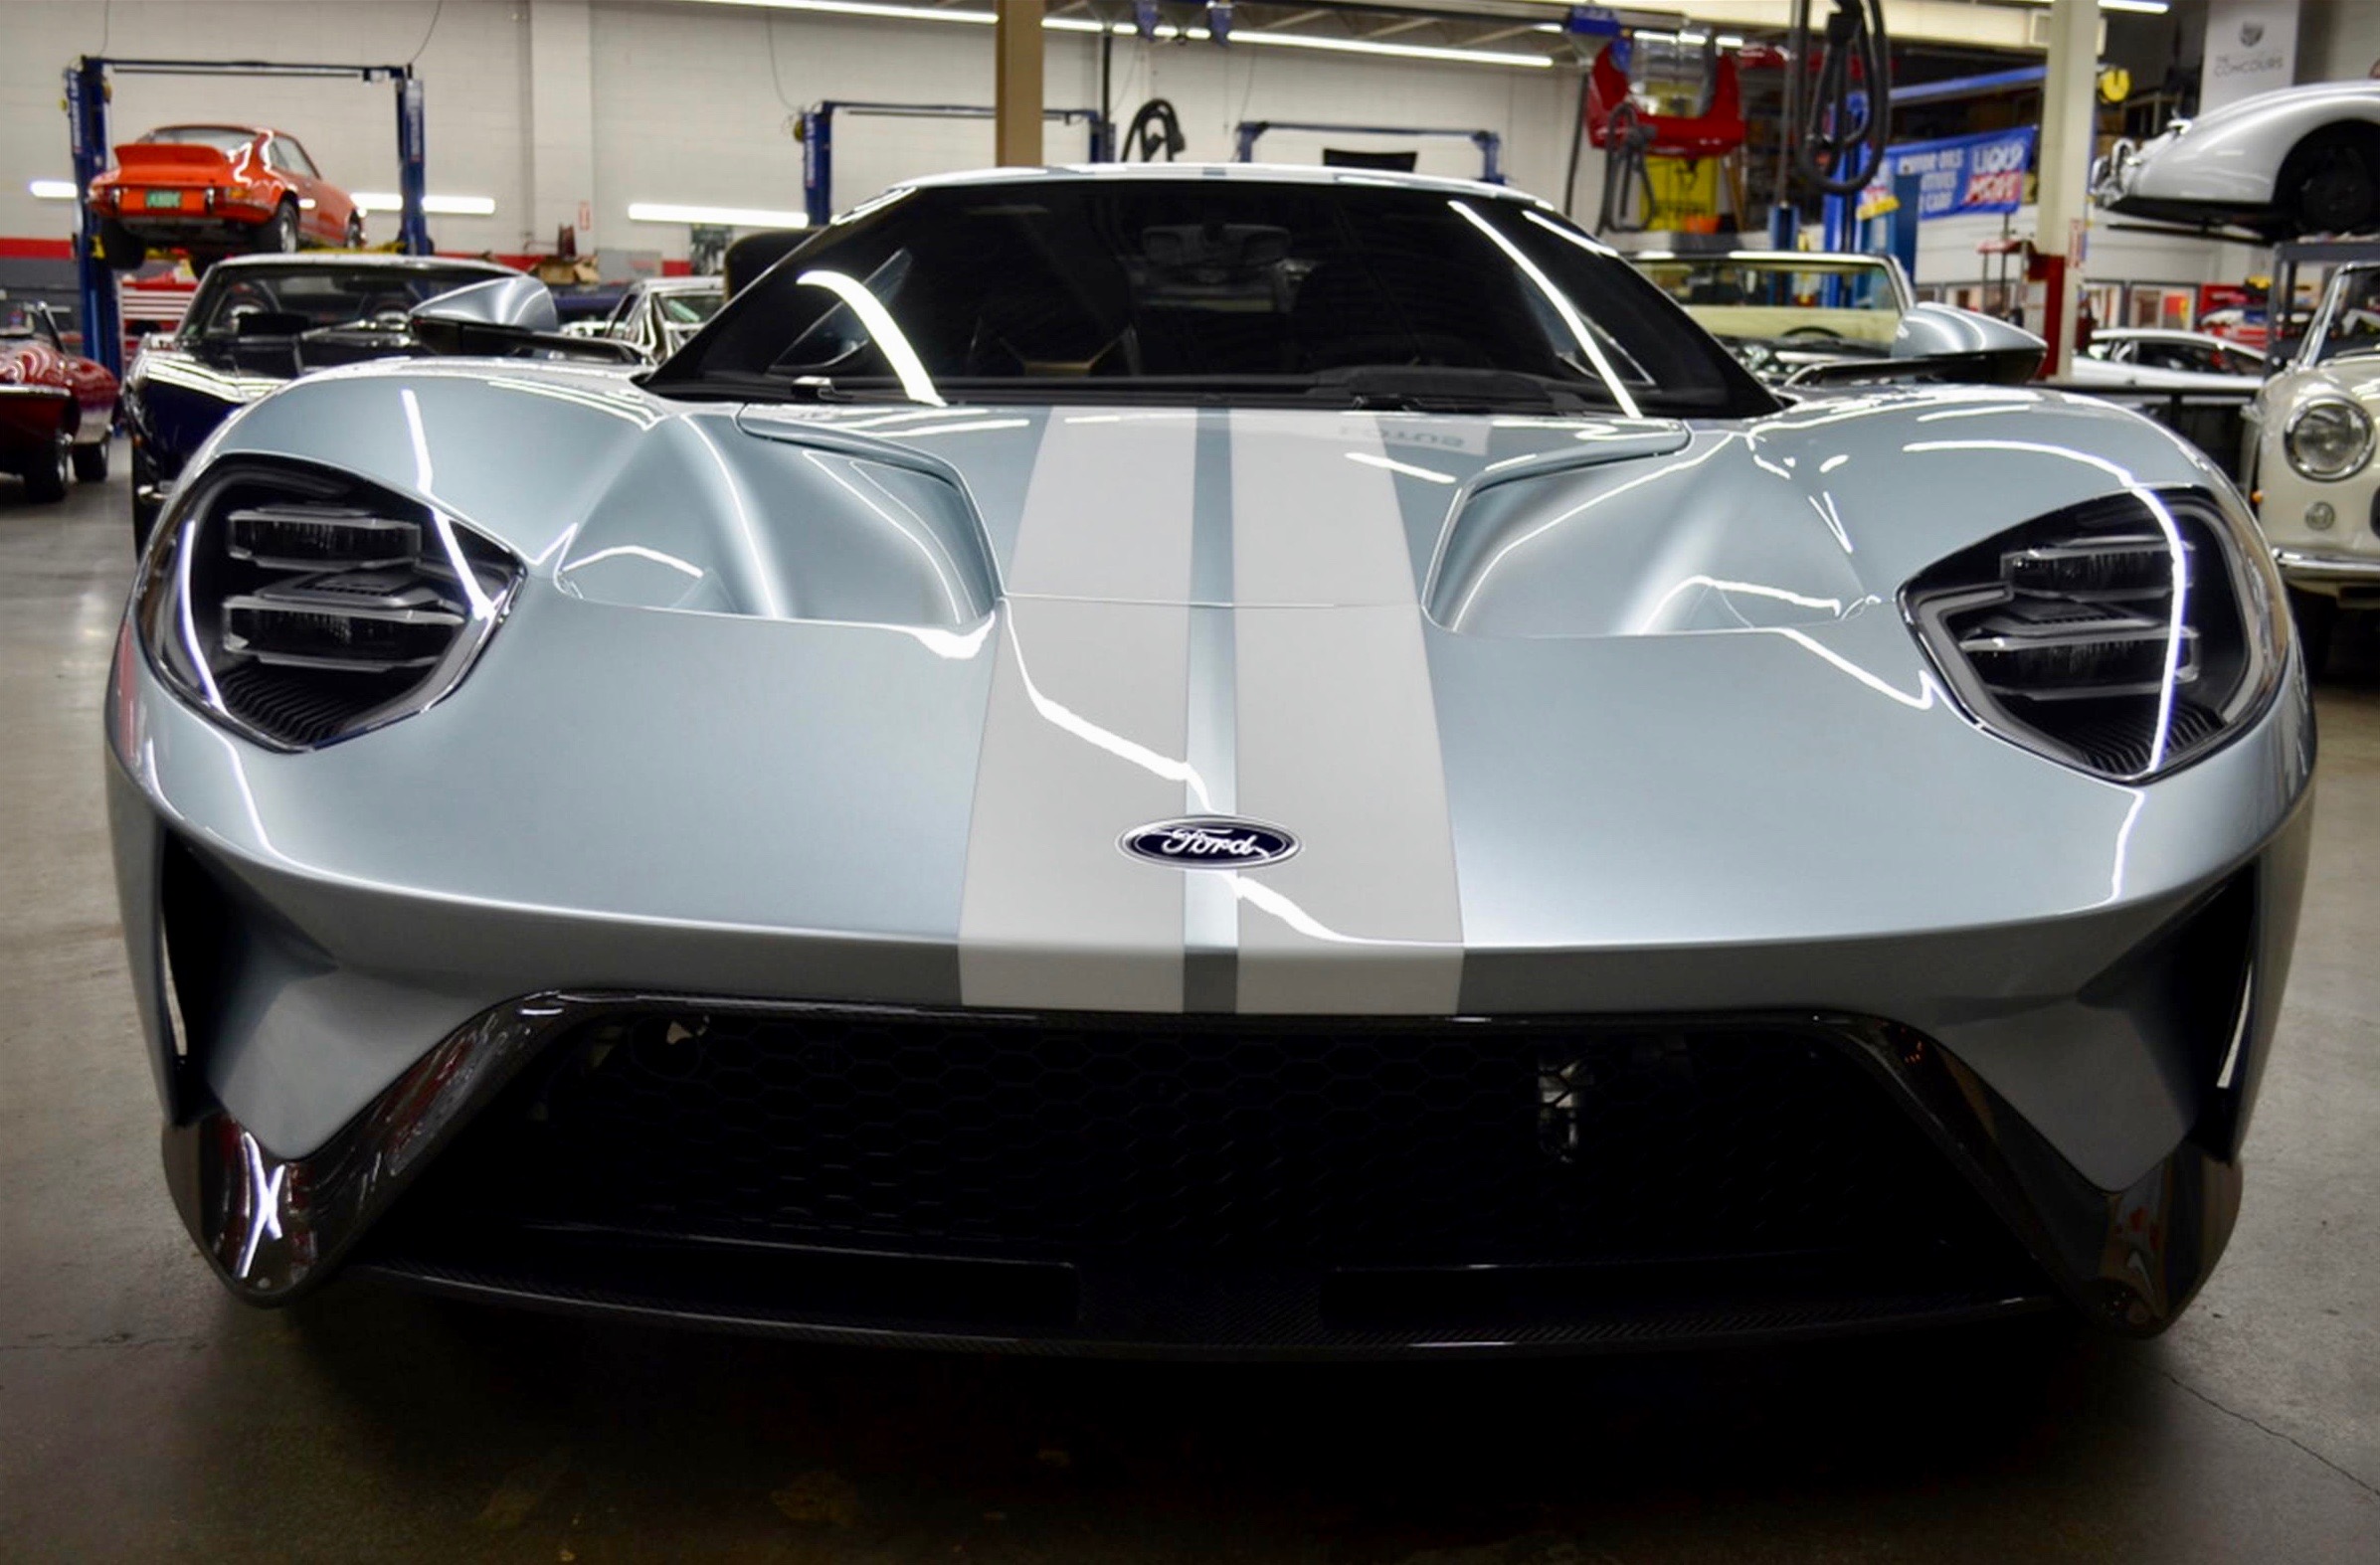 2017 Ford GT, Uniquely spec’d 2017 Ford GT is Pick of the Day, ClassicCars.com Journal